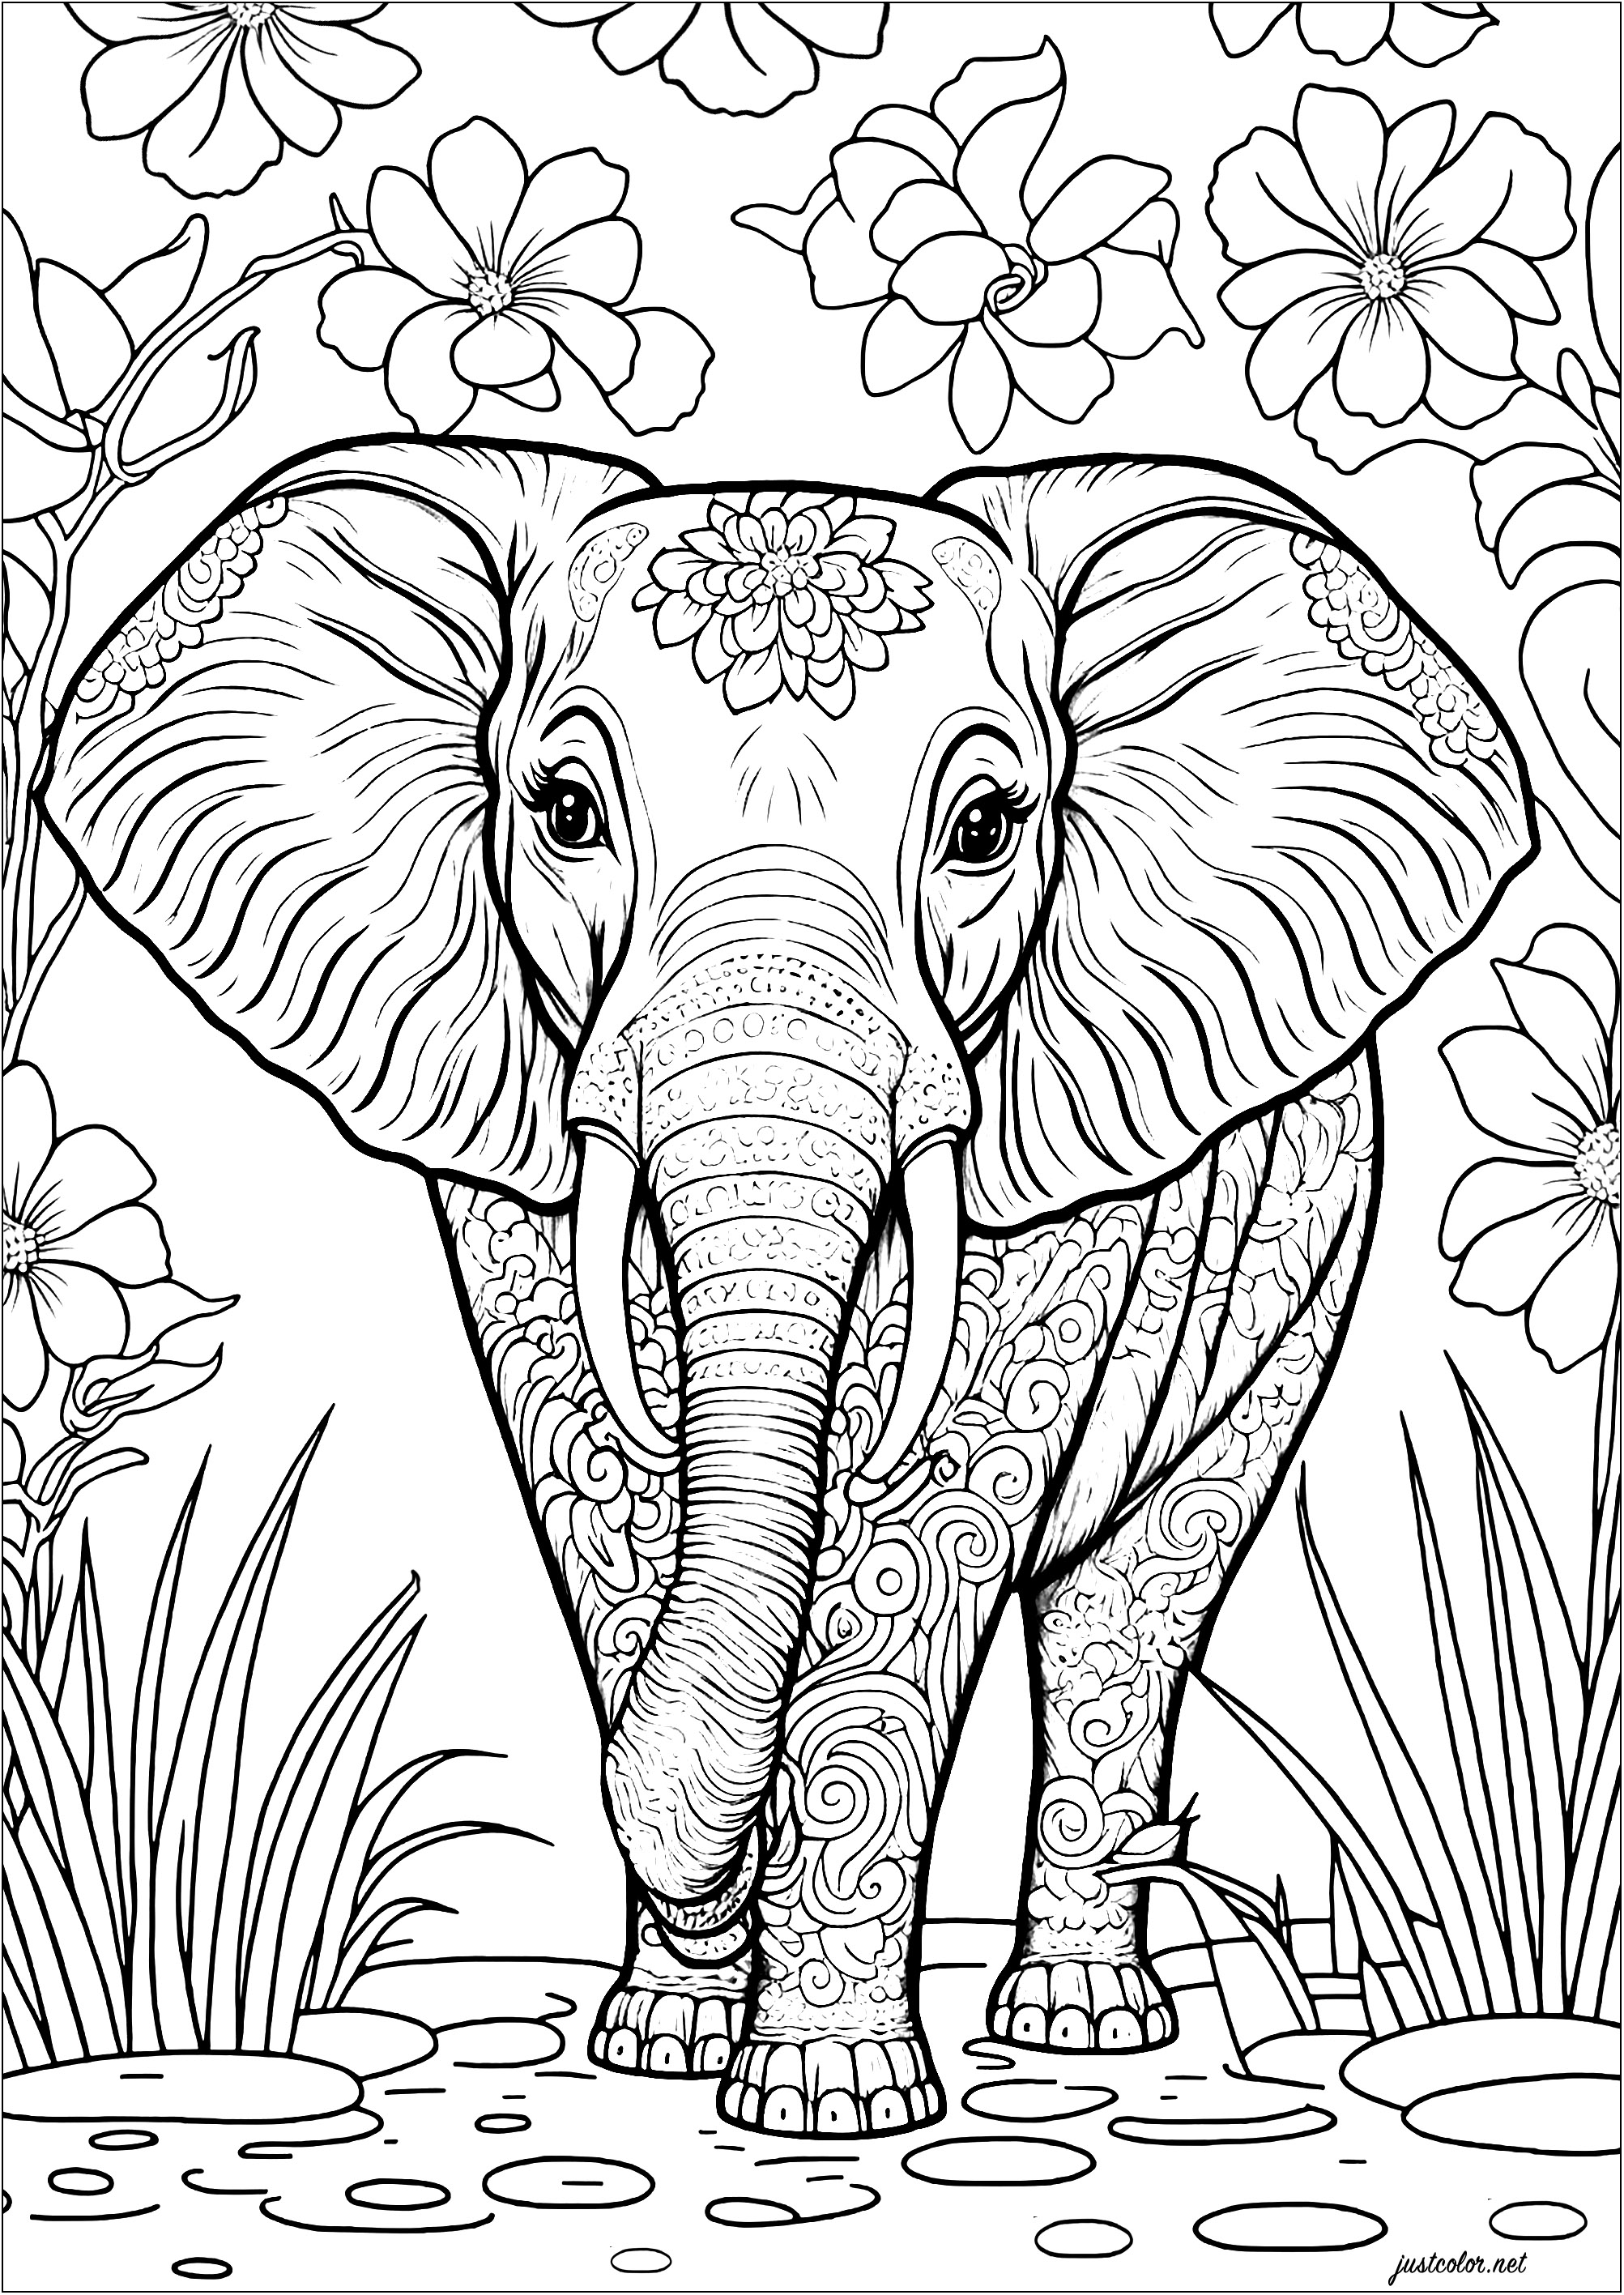 Cute elephant coloring page with various coloring motifs. The elephant's body is decorated with spirals, stripes and dots, and its ears are filled with geometric shapes and other patterns. Color the pretty flowers and vegetation in the background, too.